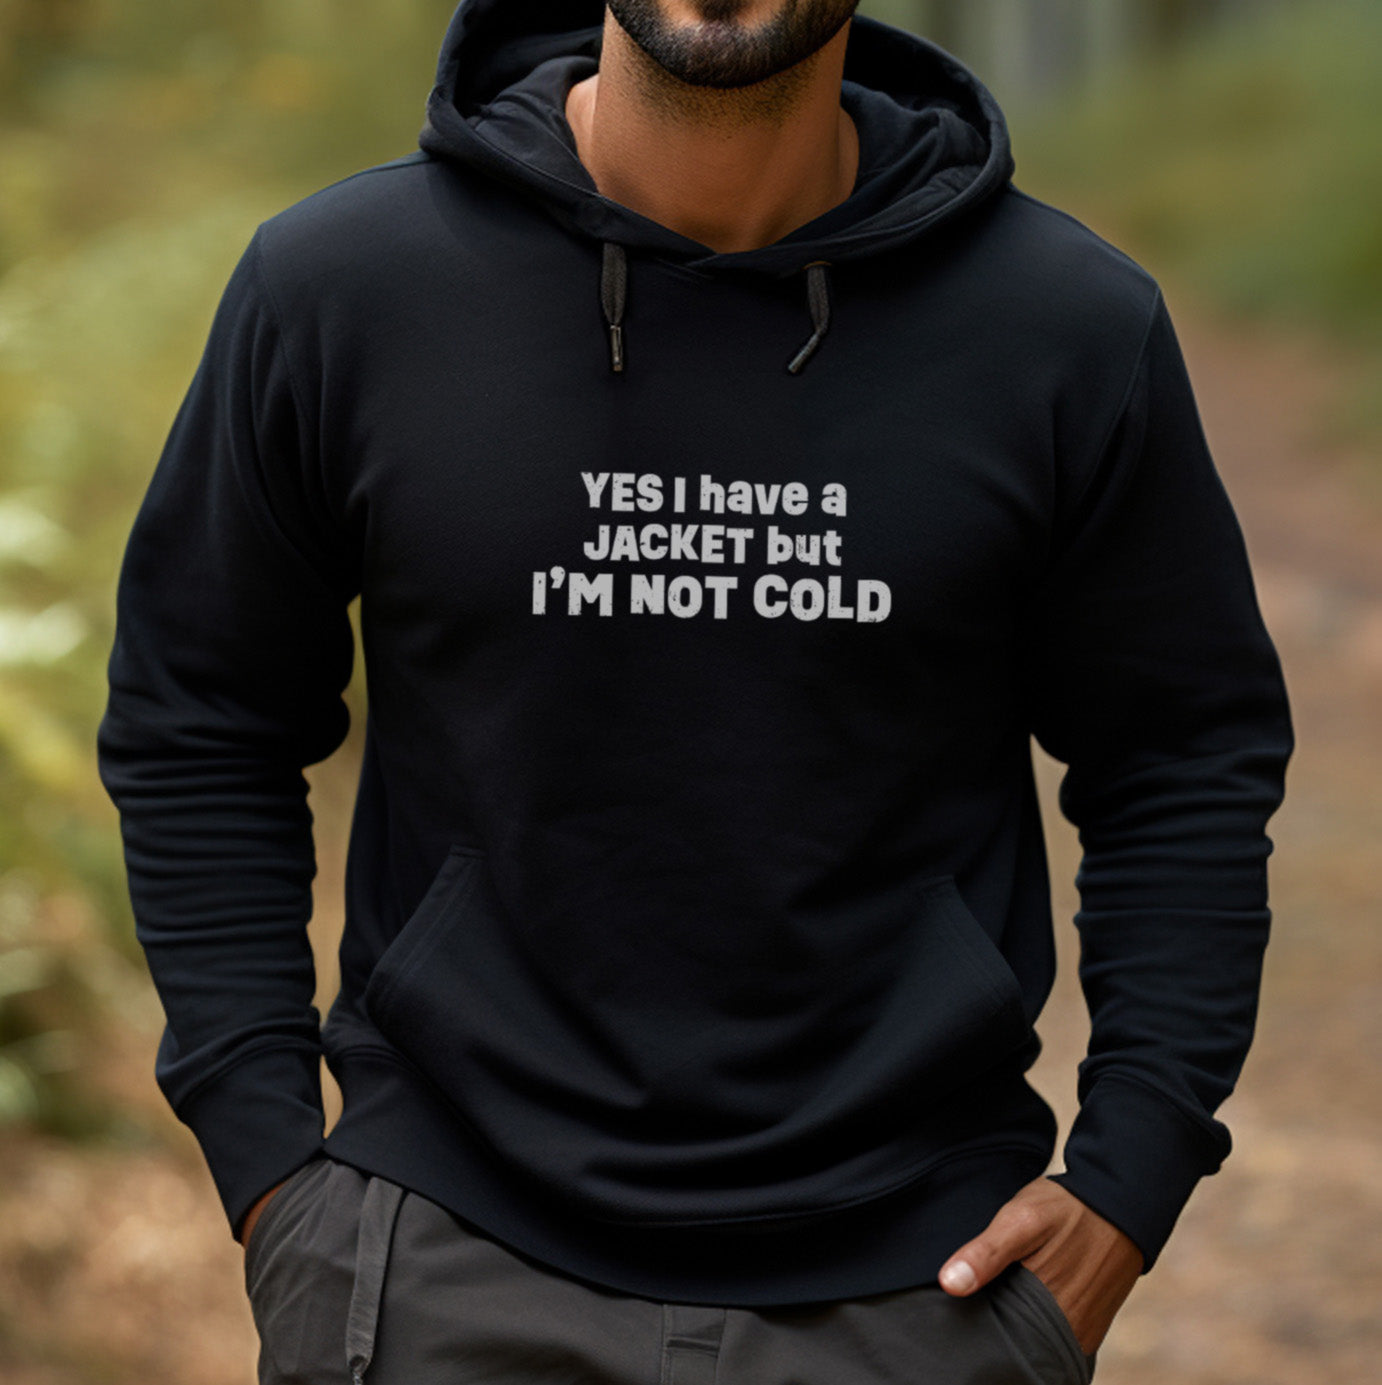 I'm Not Cold hoodie (adult sizes)